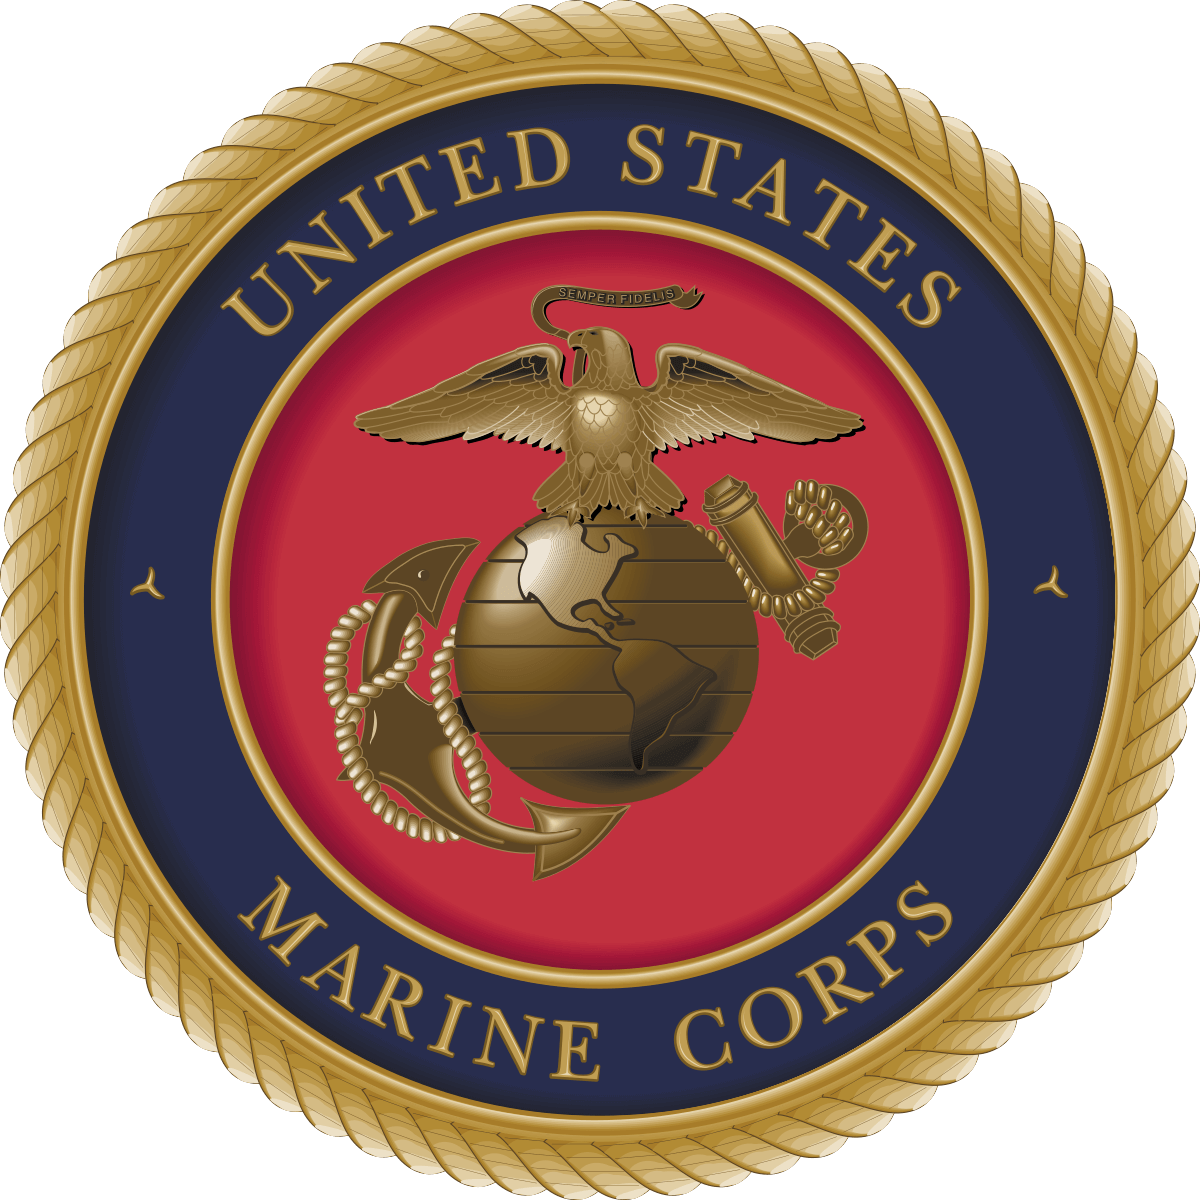 1200px-Emblem_of_the_United_States_Marine_Corps.svg_.png